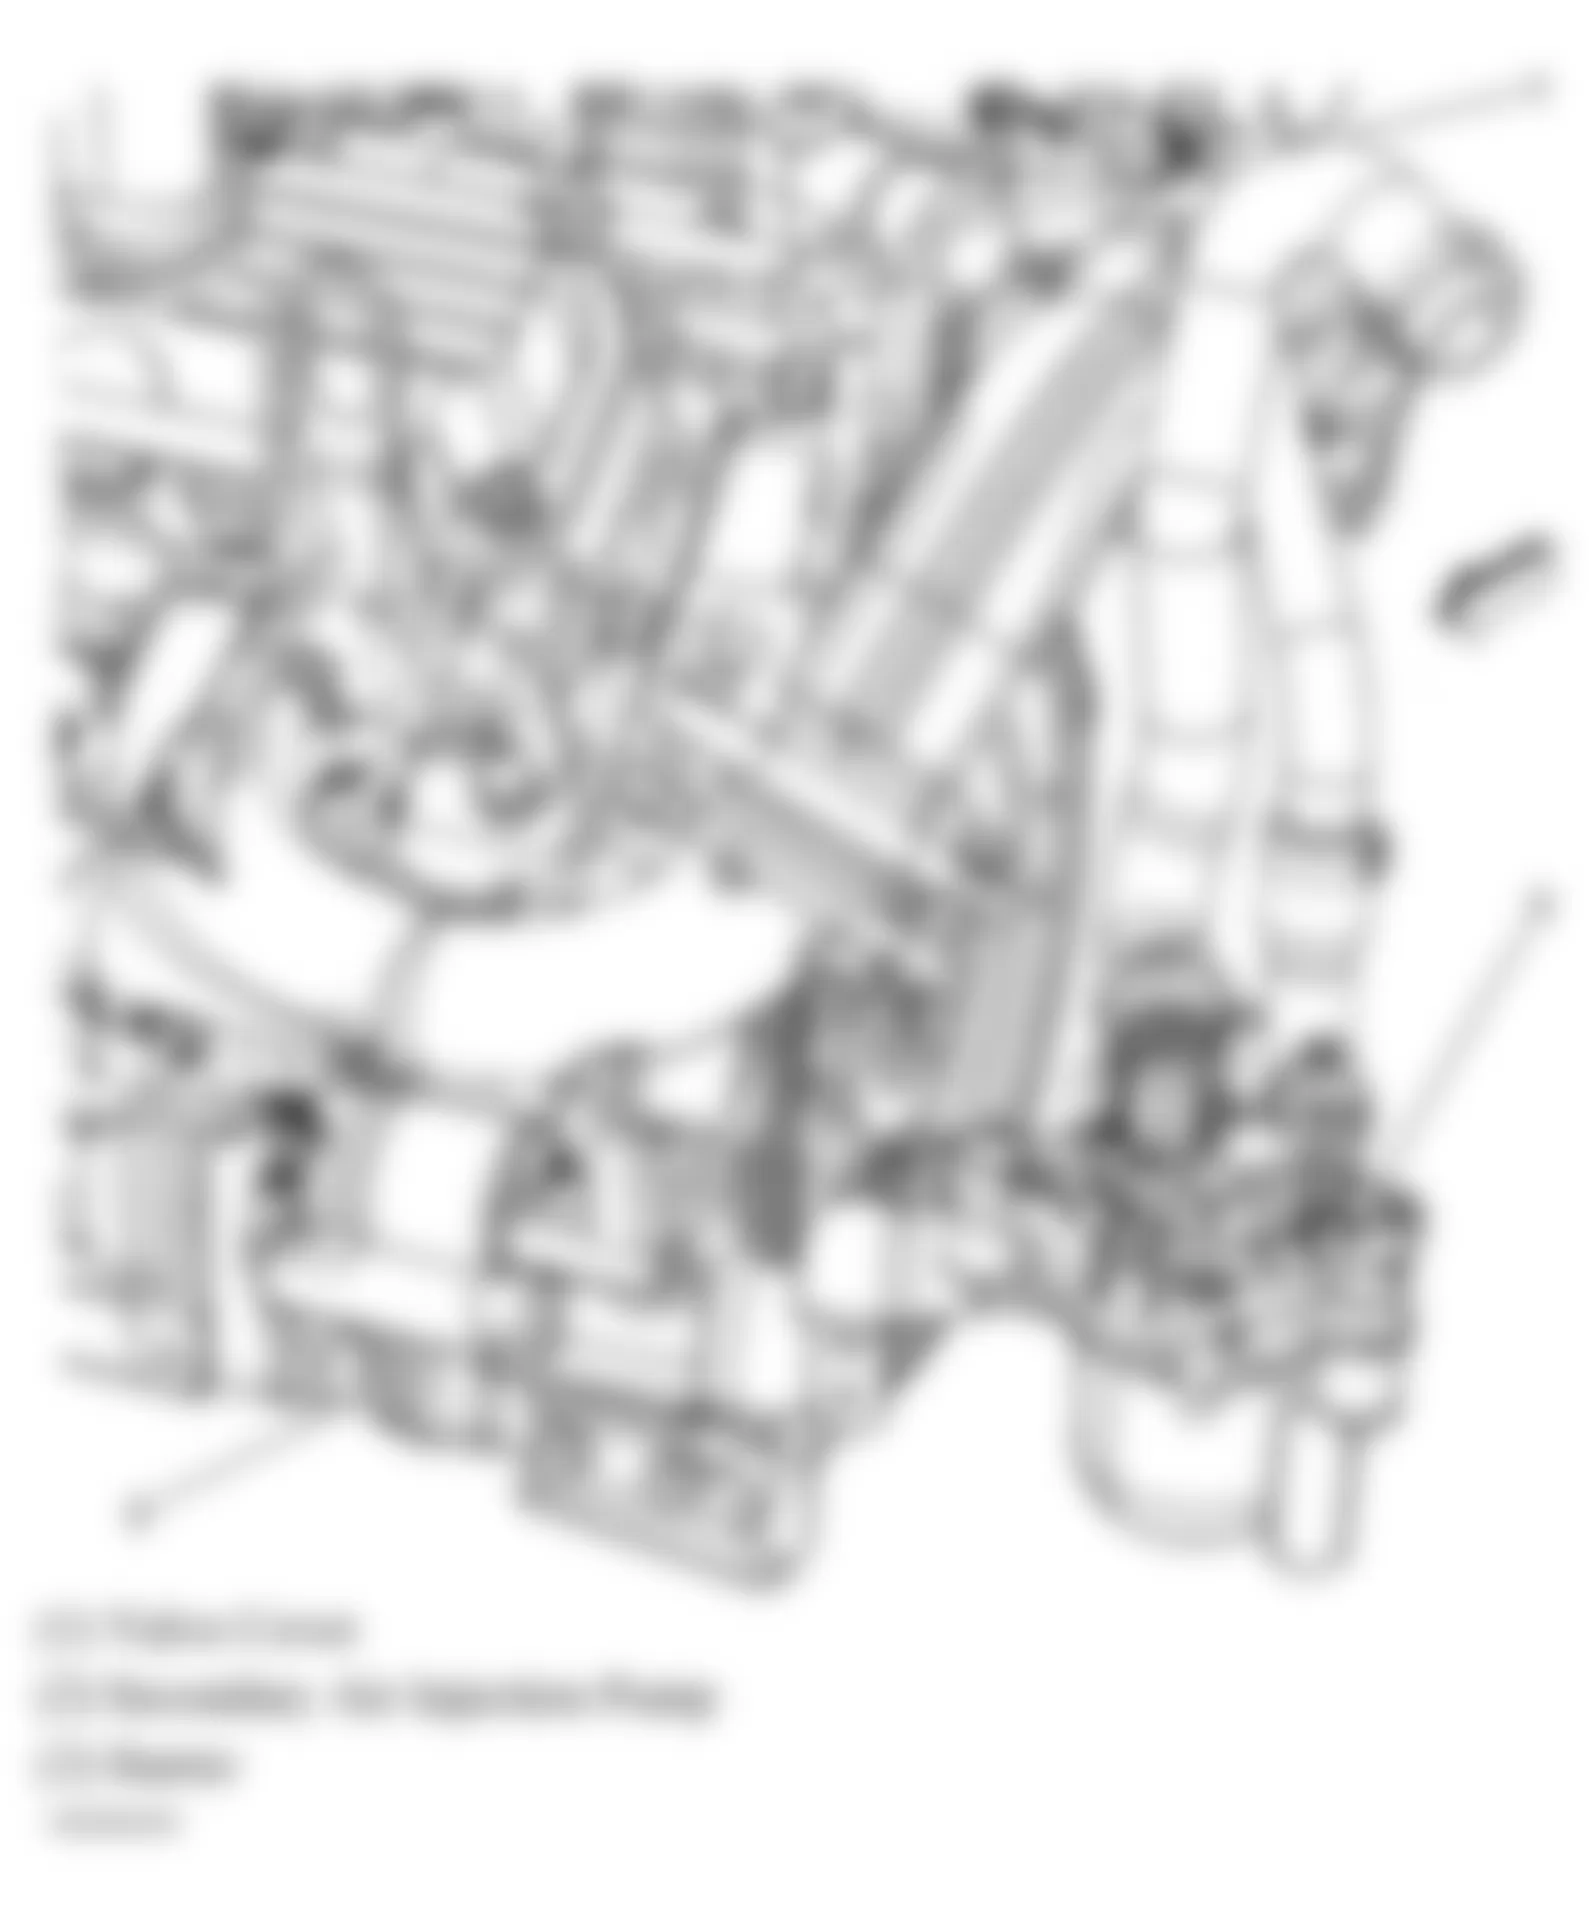 Buick Allure CXL 2008 - Component Locations -  Left Rear Of Engine (3.8L)